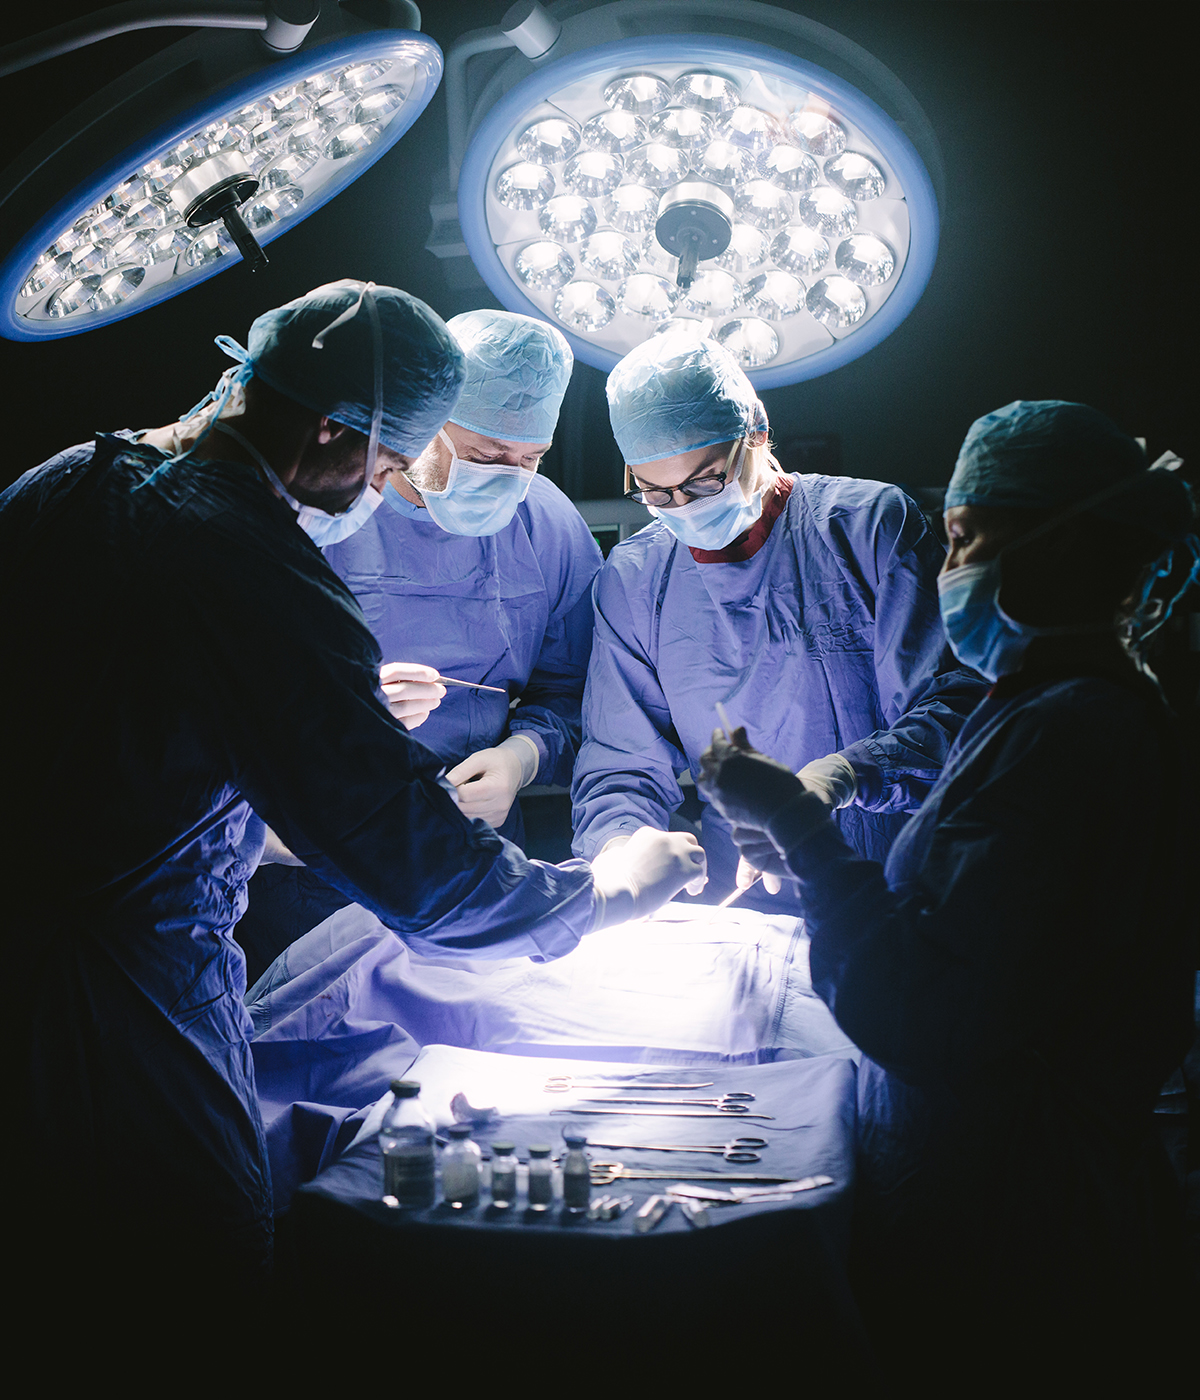 Four surgeons operating on a patient